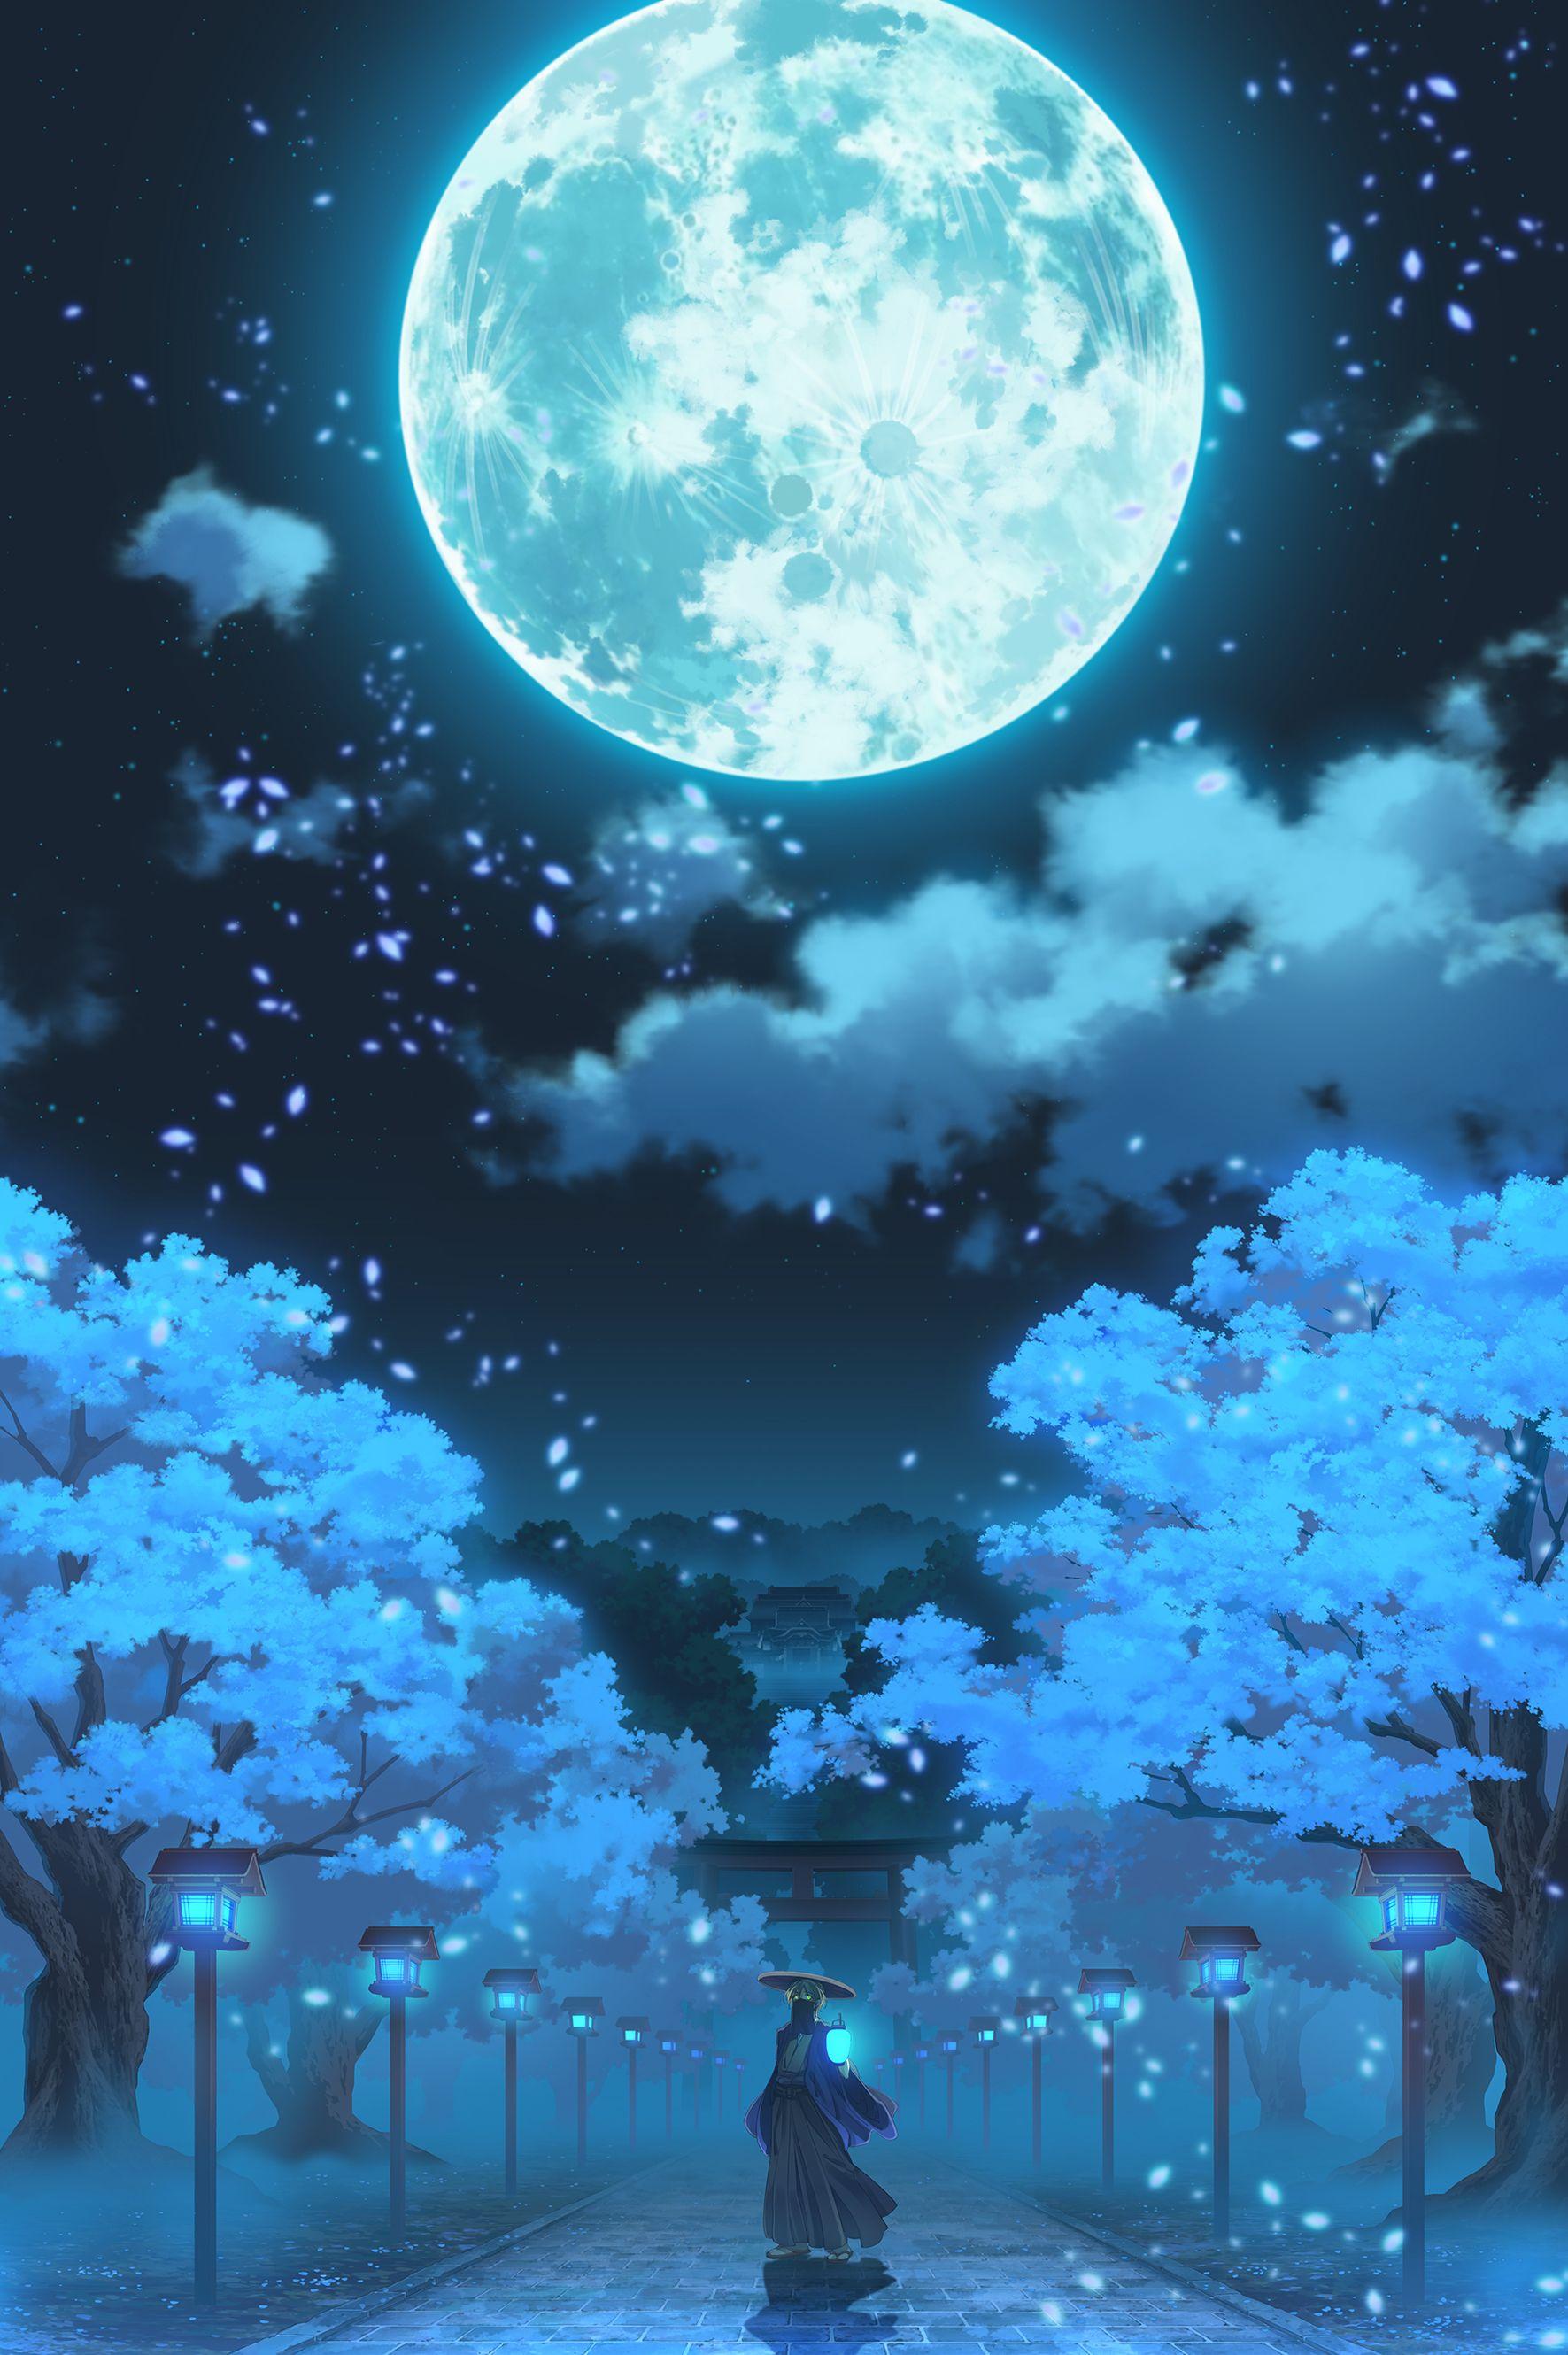 Anime Aesthetic Night Wallpapers - Wallpaper Cave